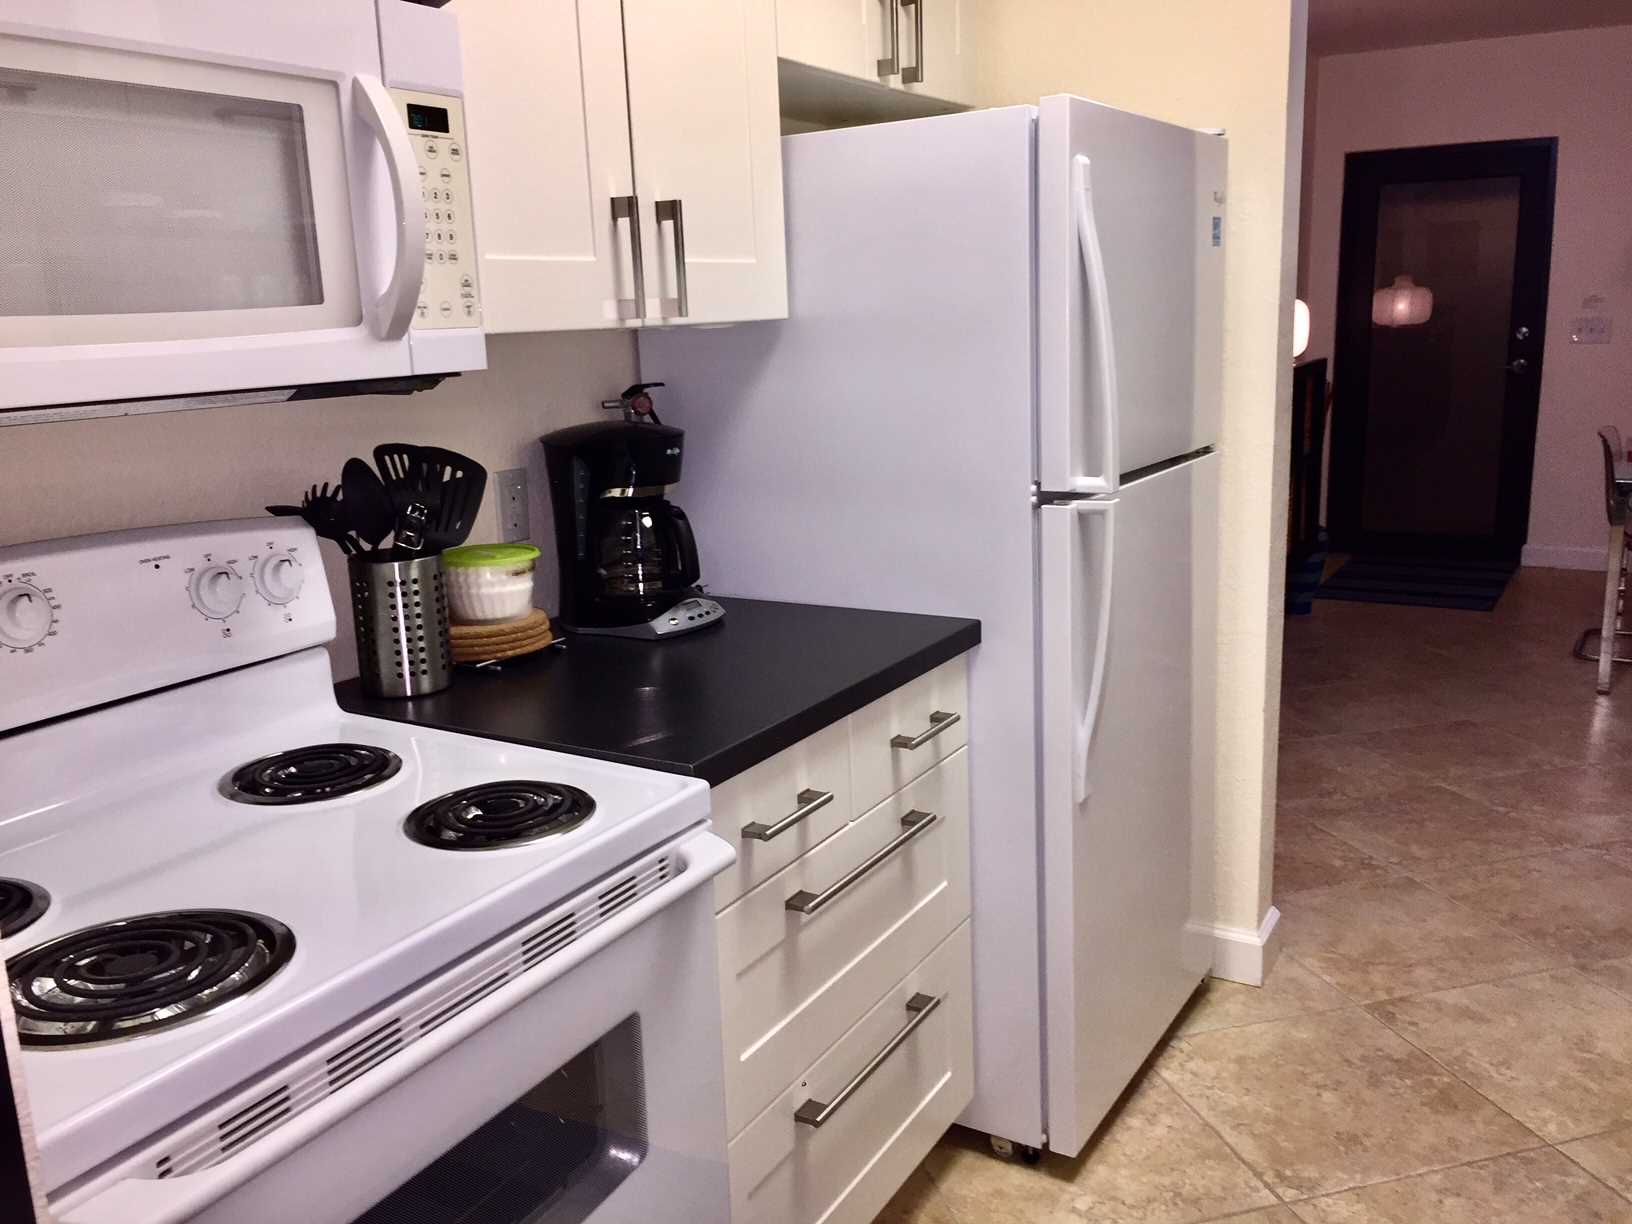 Kitchen has all new appliances including built-in microwave.